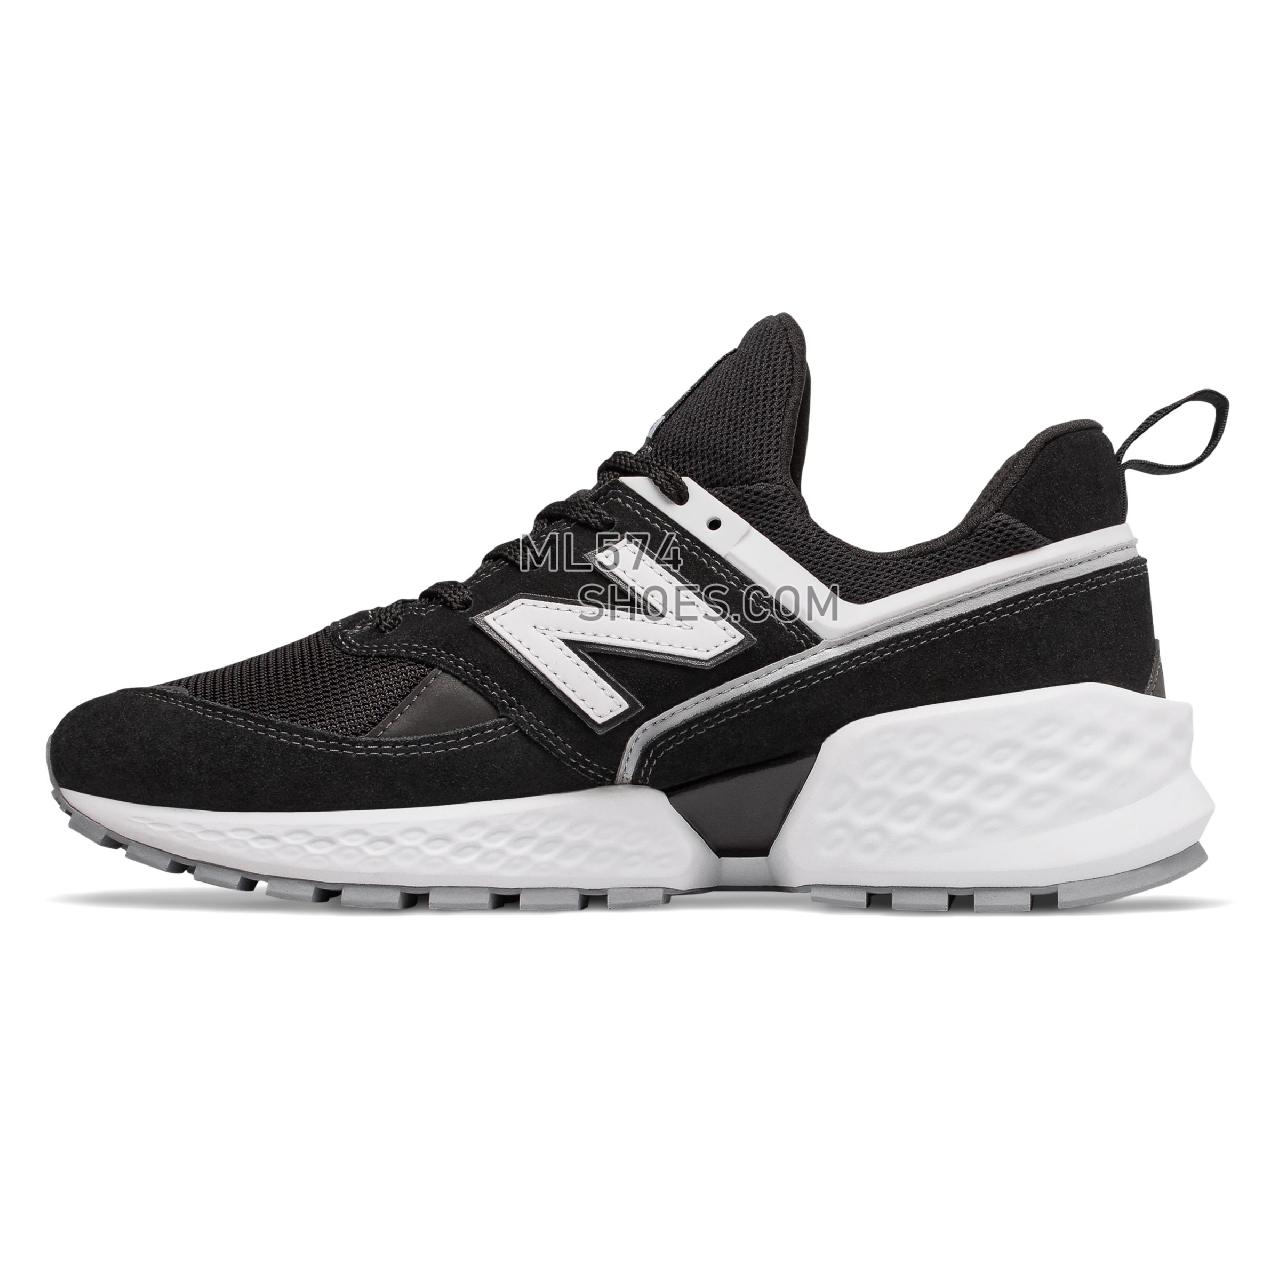 New Balance 574 Sport - Men's Sport Style Sneakers - Black with White - MS574NSE